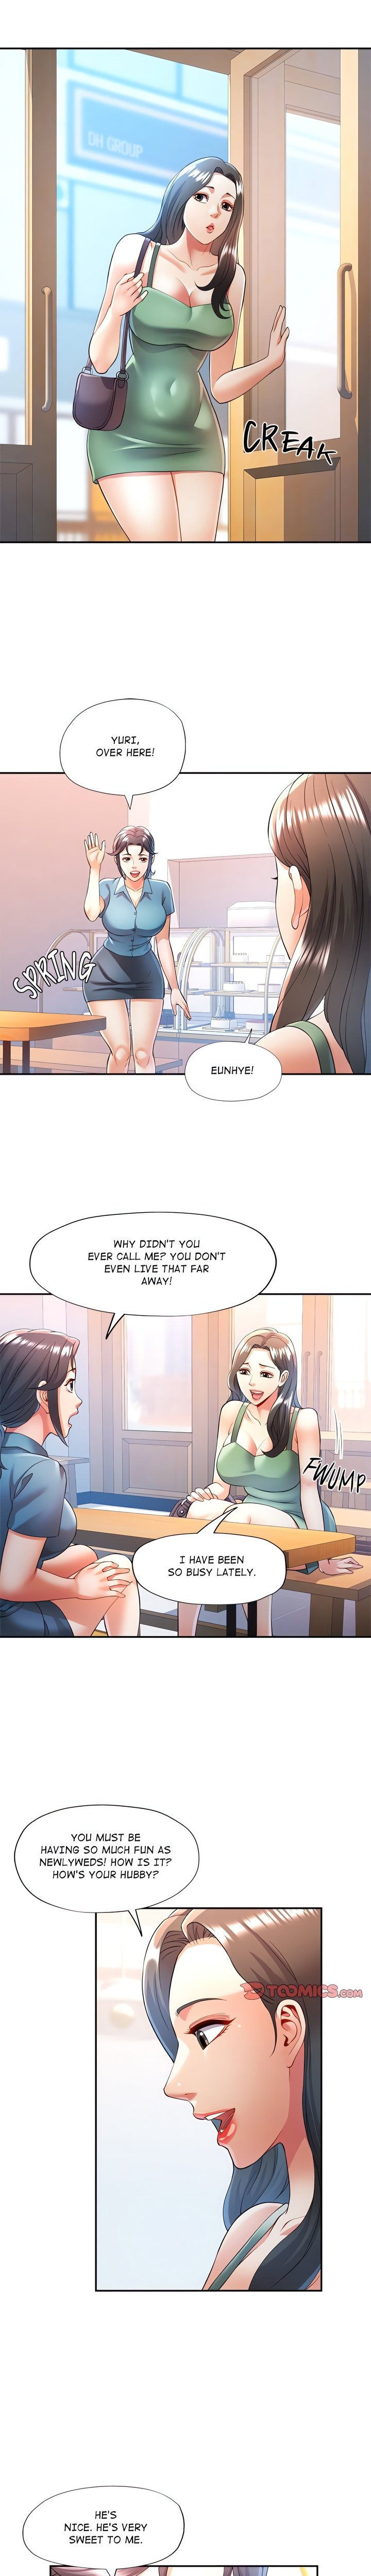 in-her-place-chap-25-2